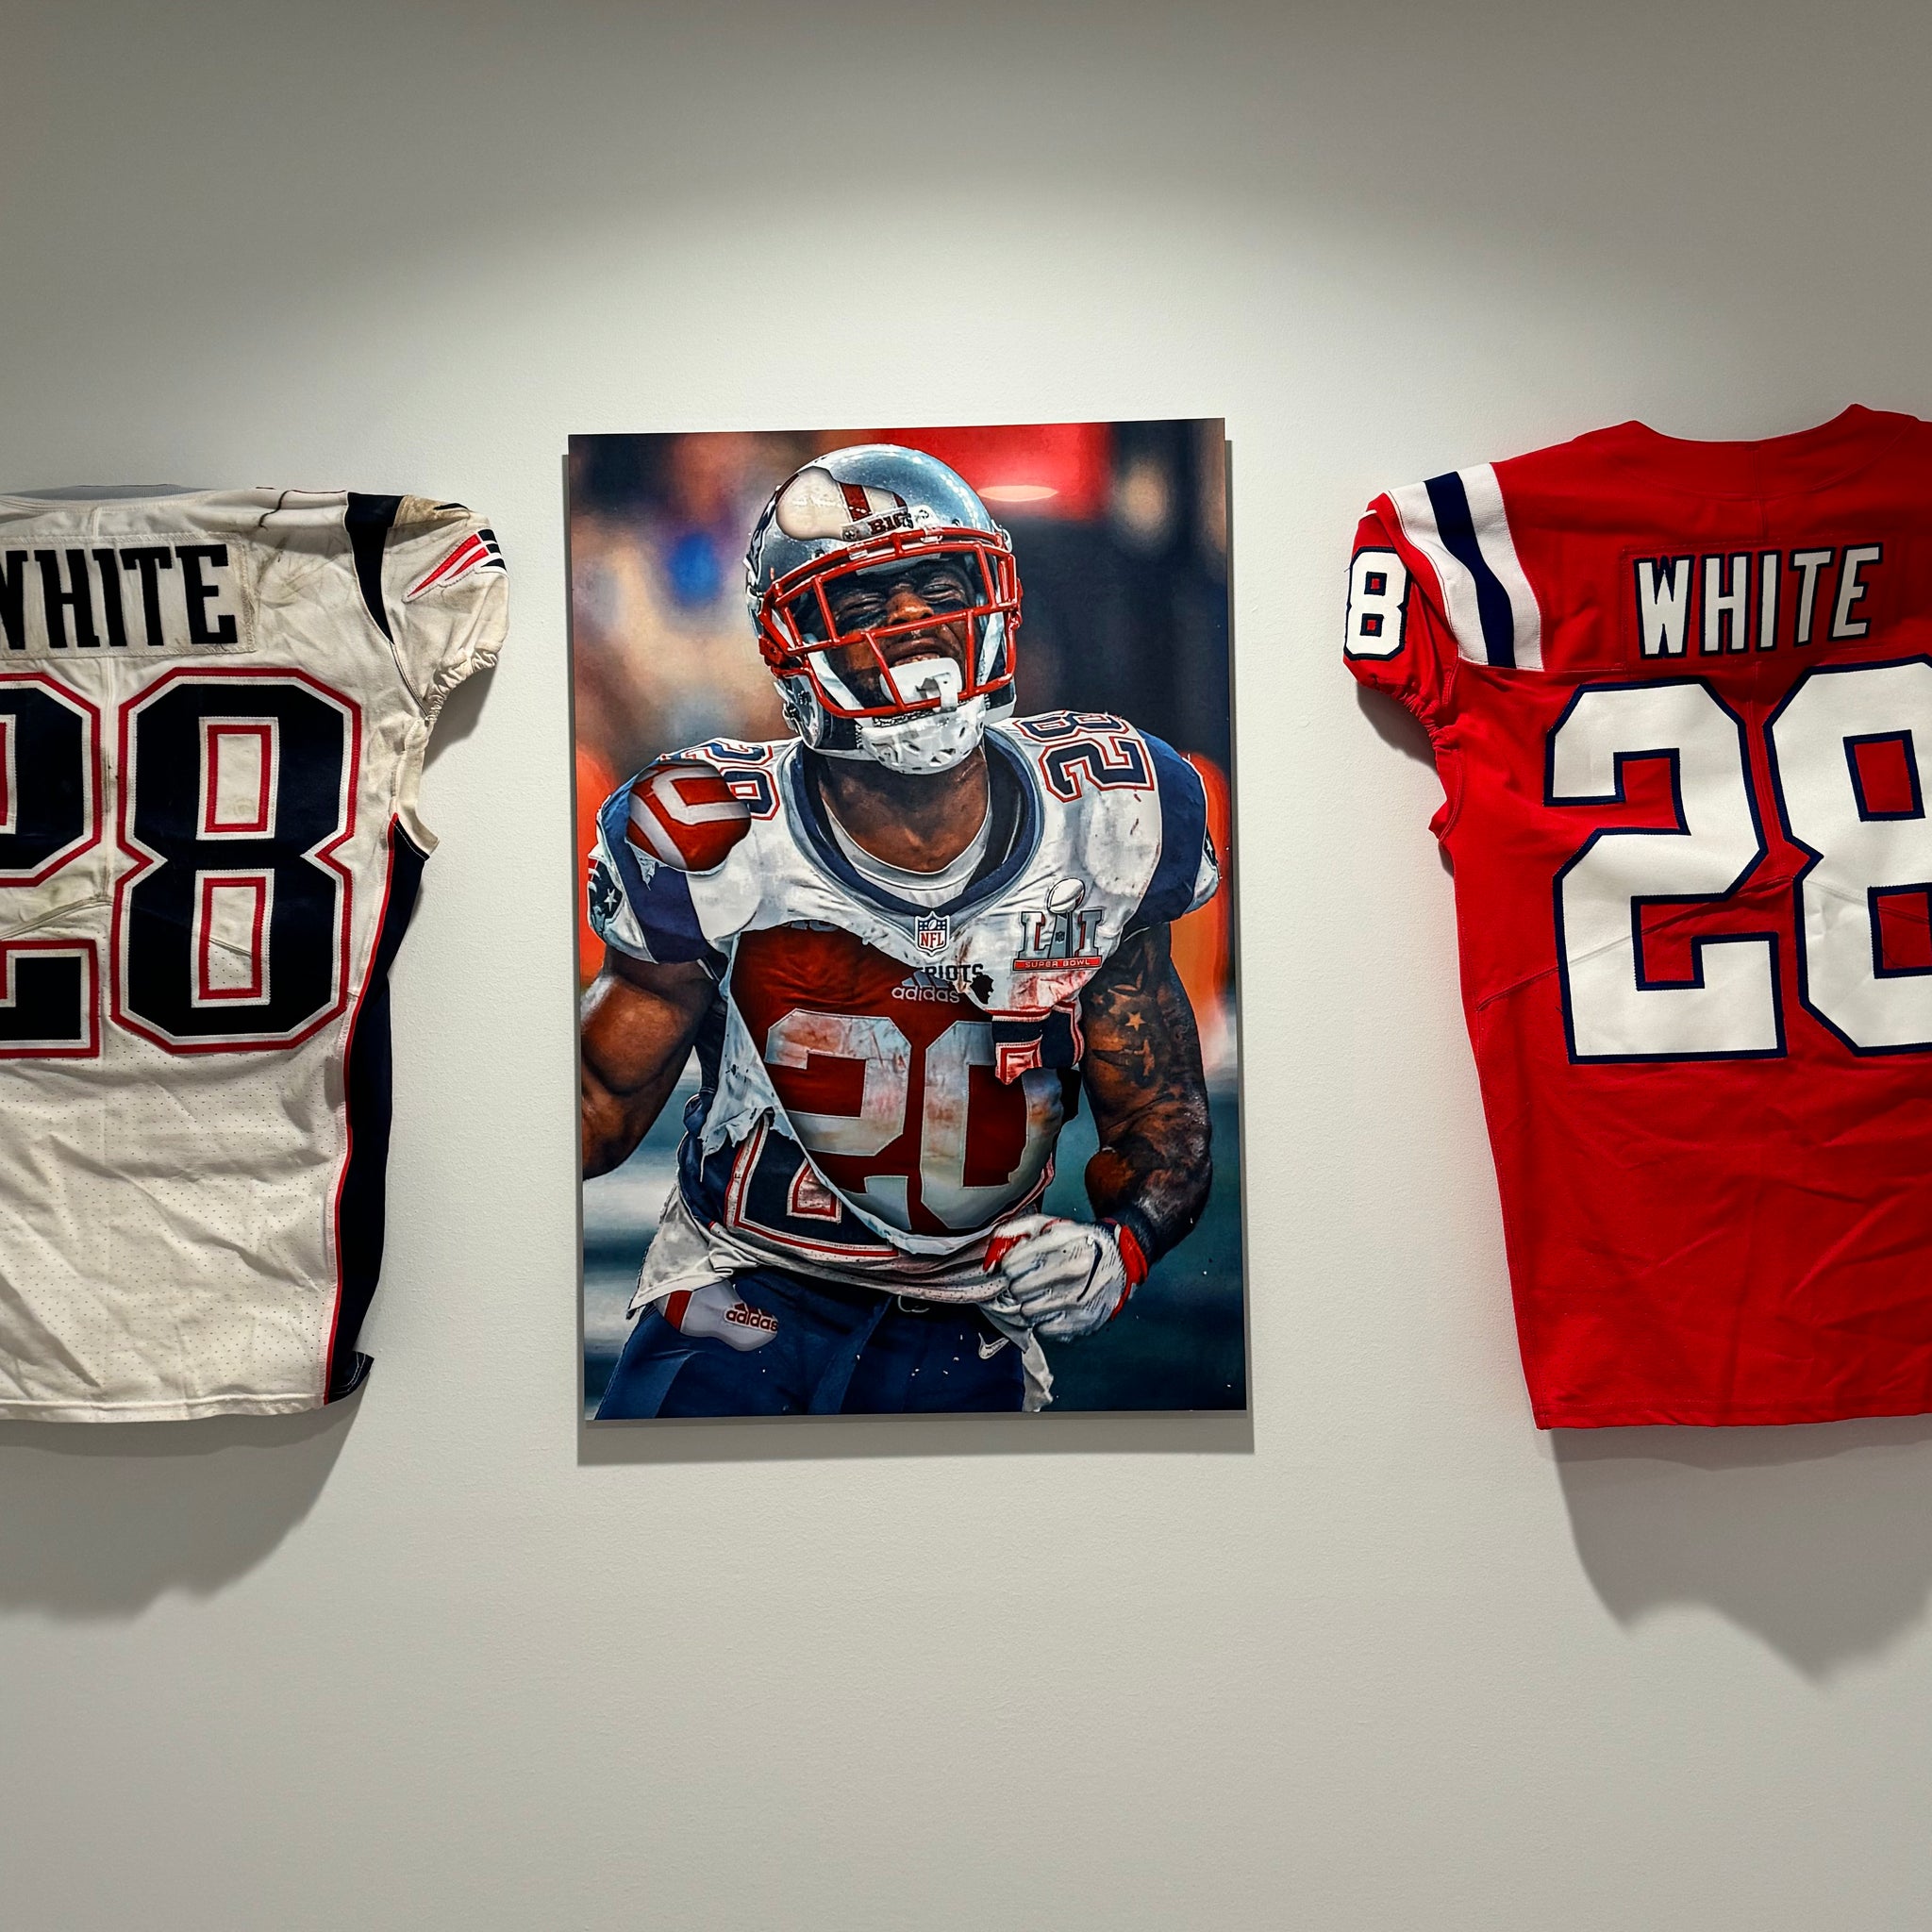 James Calvin White 3 x Superbowl Chamption and 3 TD Combo Pack DEAL!-Jersey Mount-Sports Displays